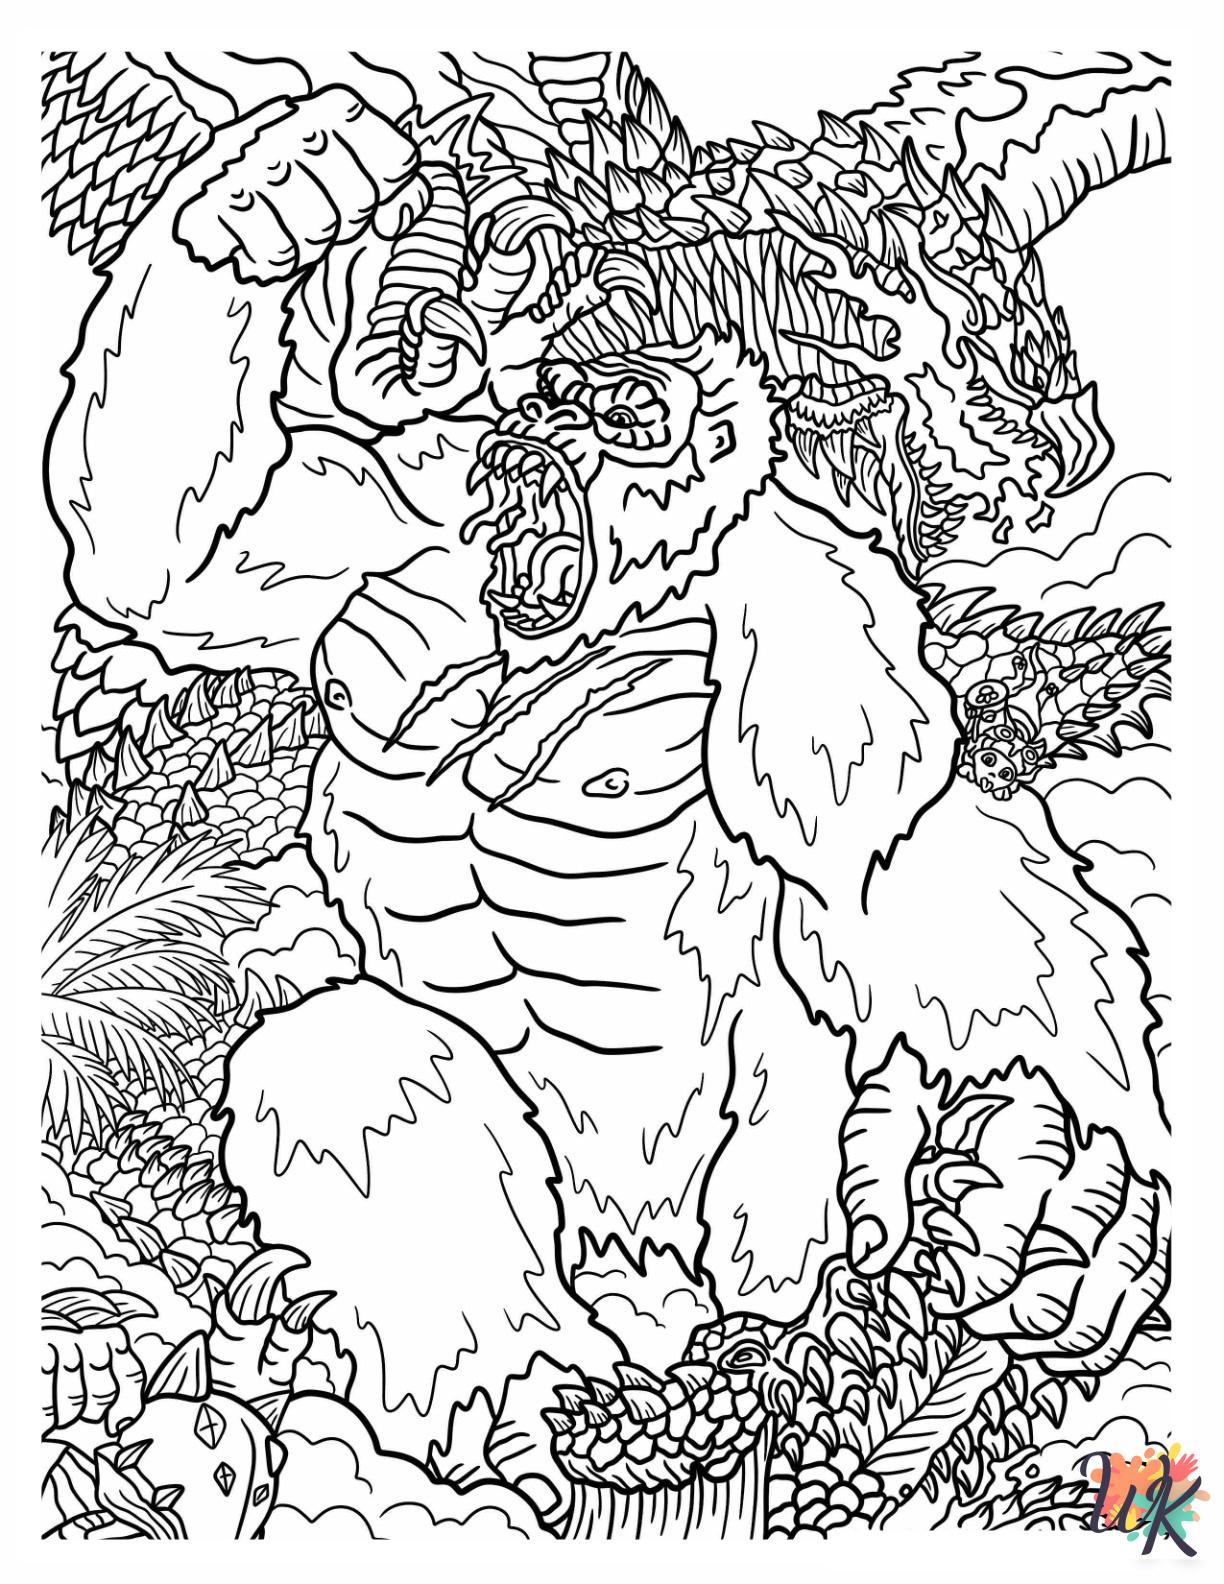 King Kong coloring pages for adults easy